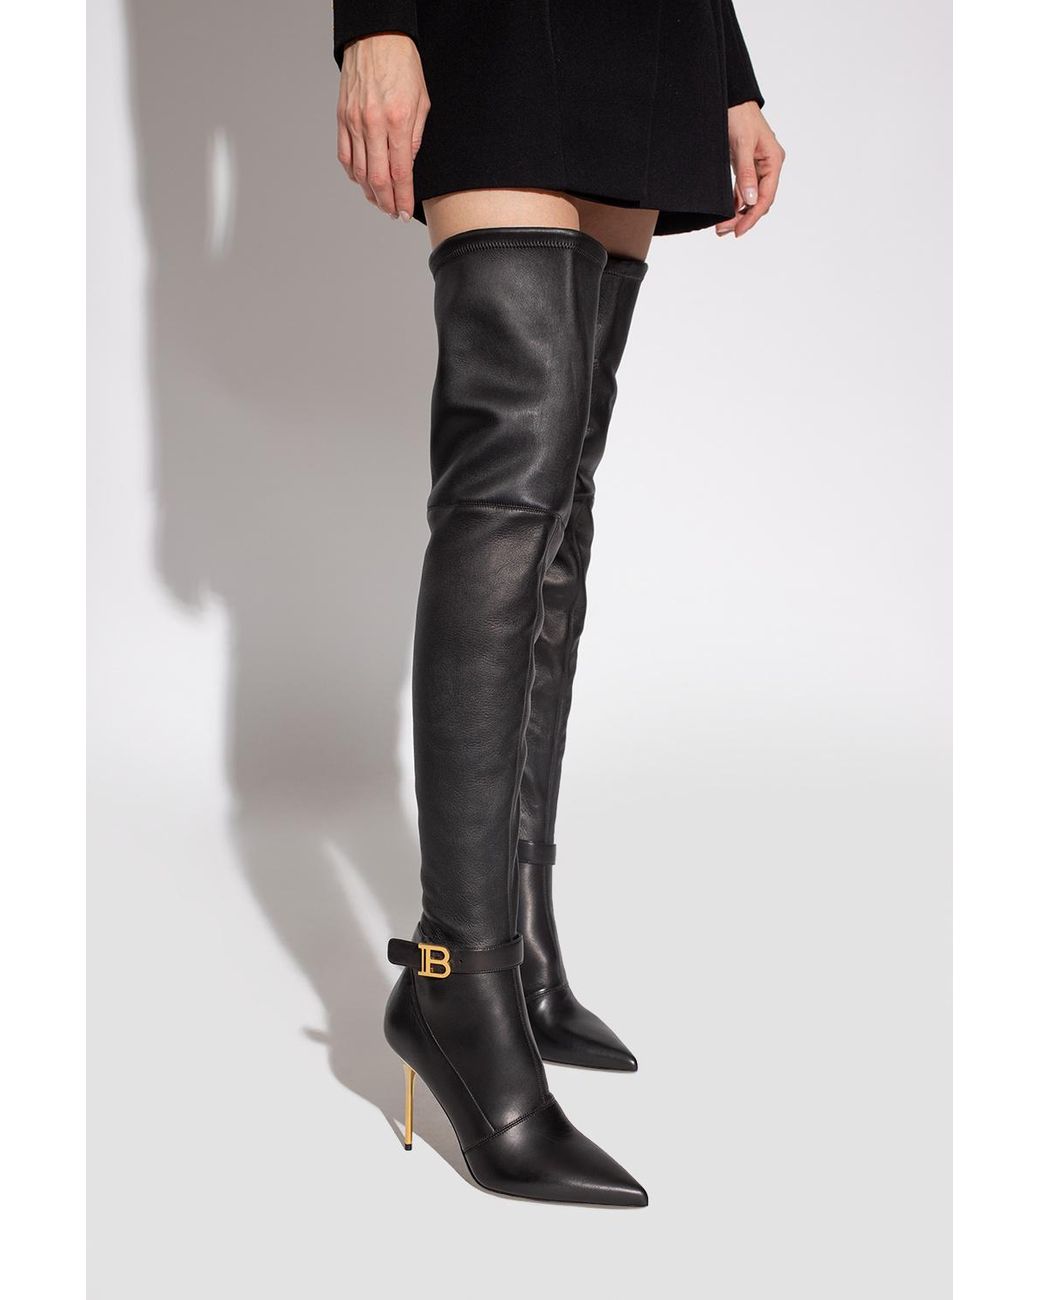 Balmain Leather Over-the-knee Boots in Black | Lyst